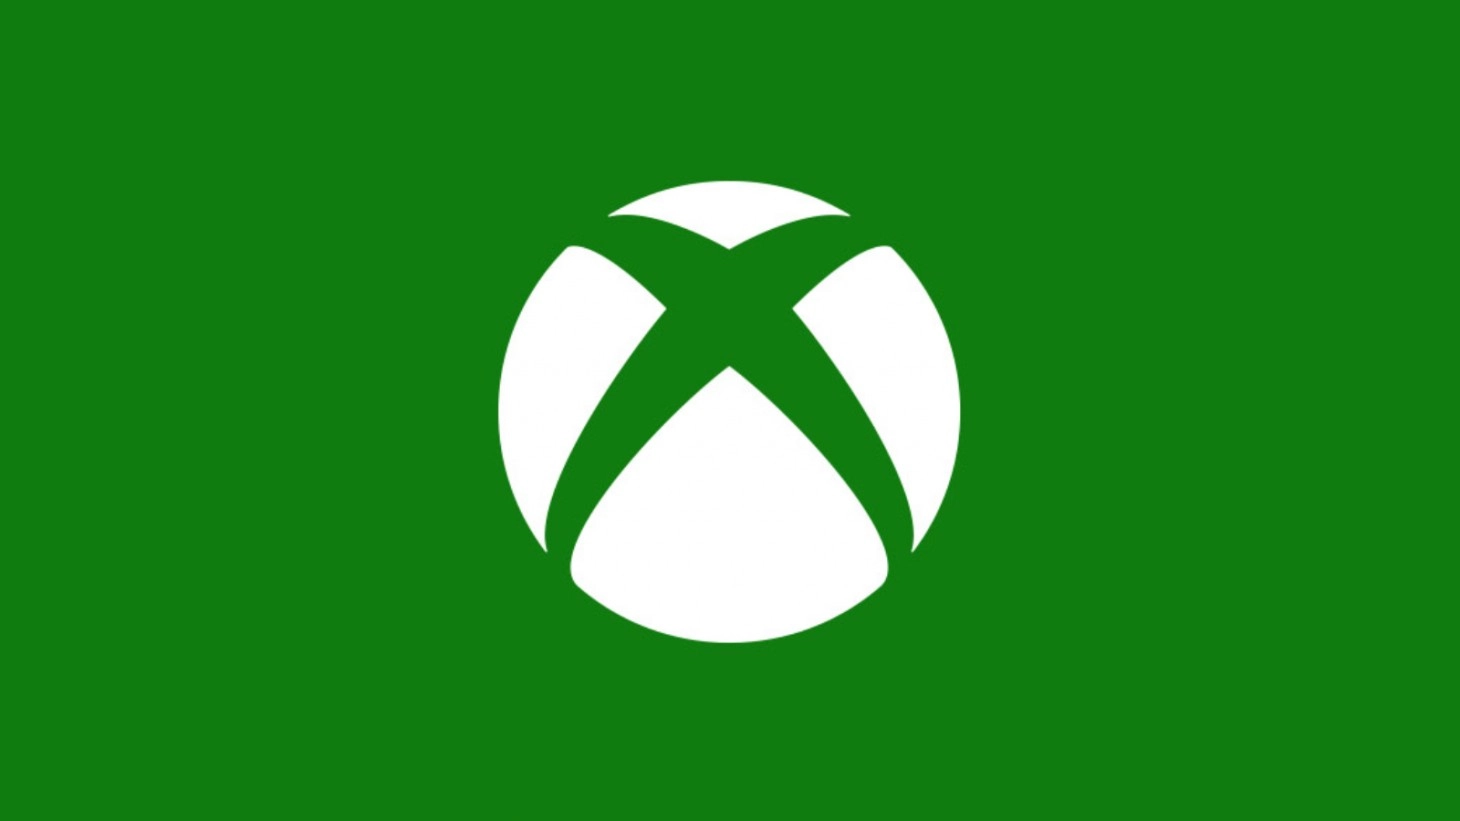 Microsoft Announces Key Leadership Changes in Gaming Division